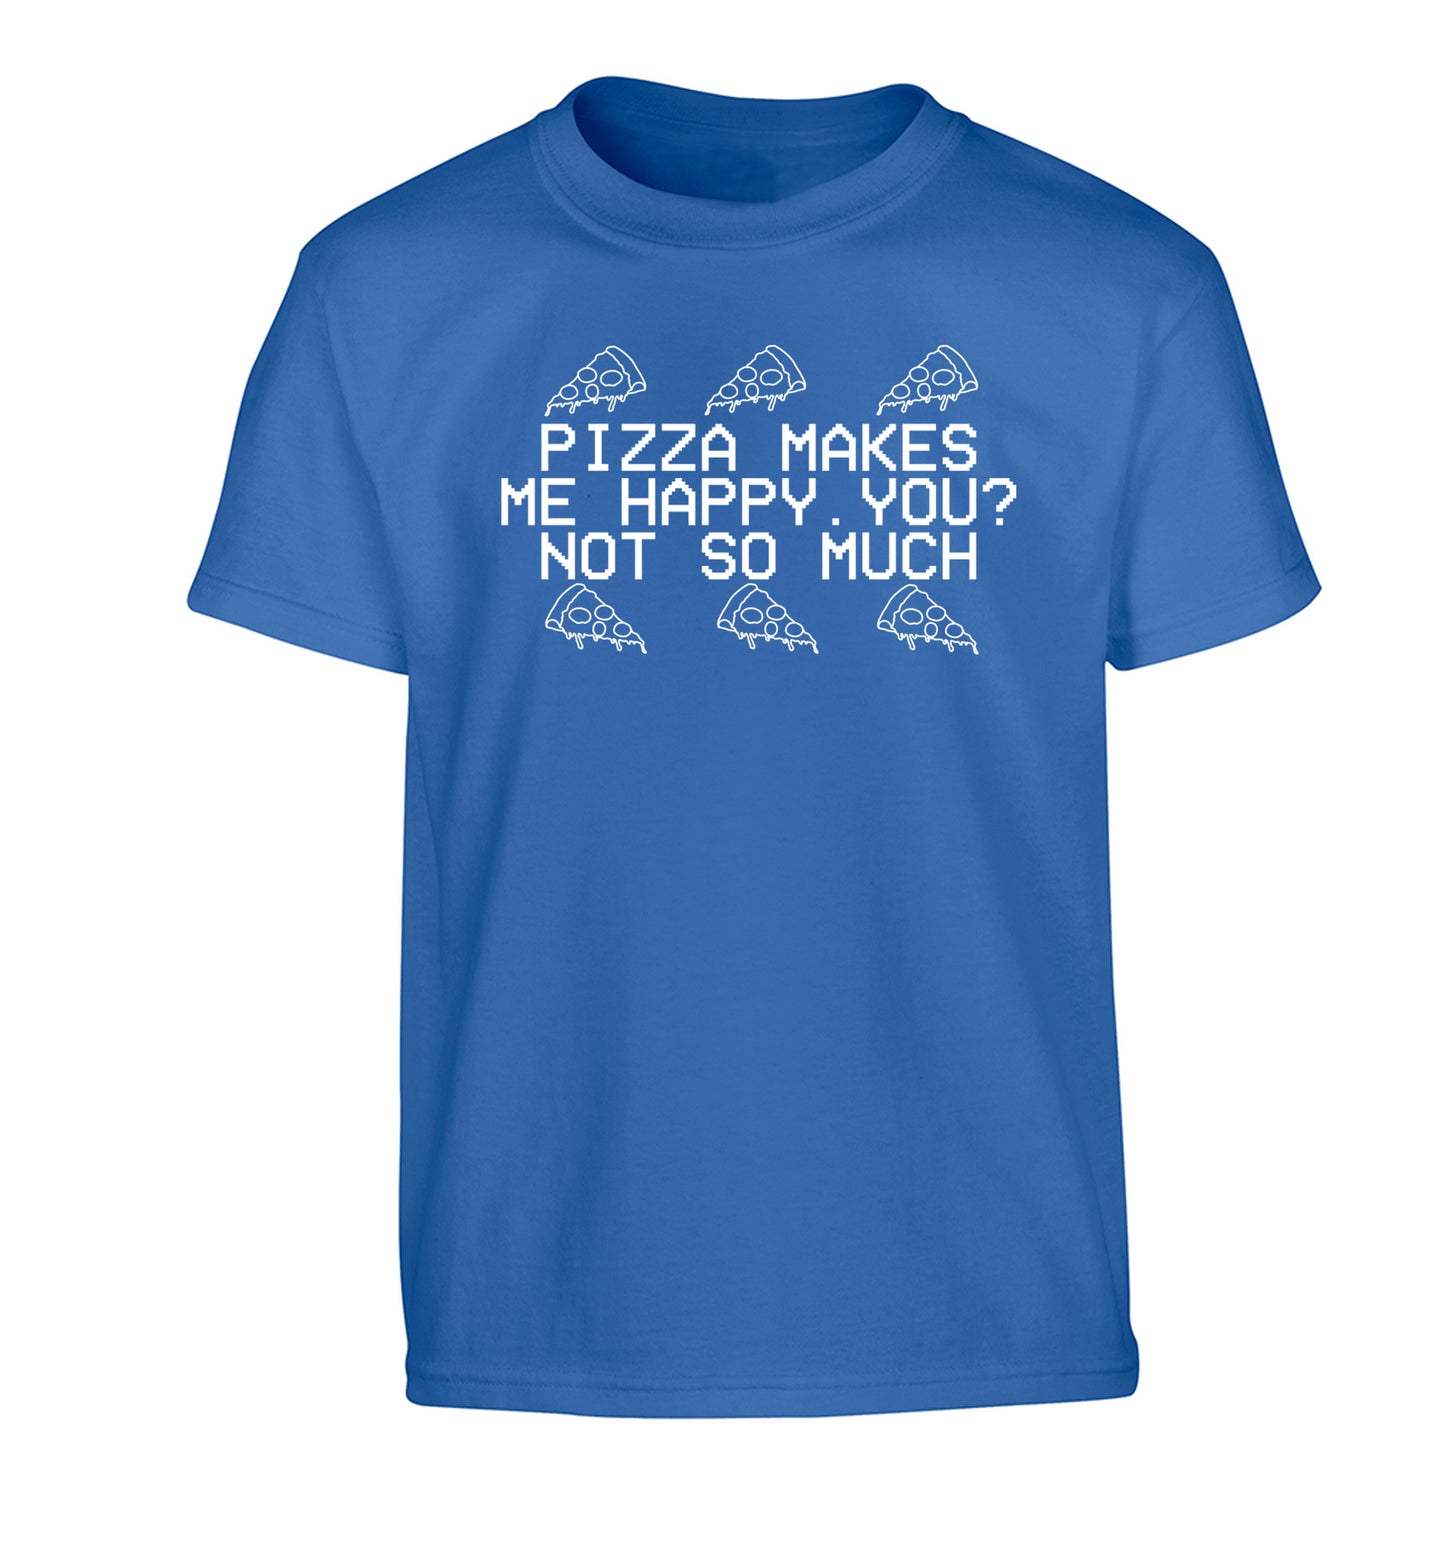 Pizza makes me happy, You? Not so much Children's blue Tshirt 12-14 Years